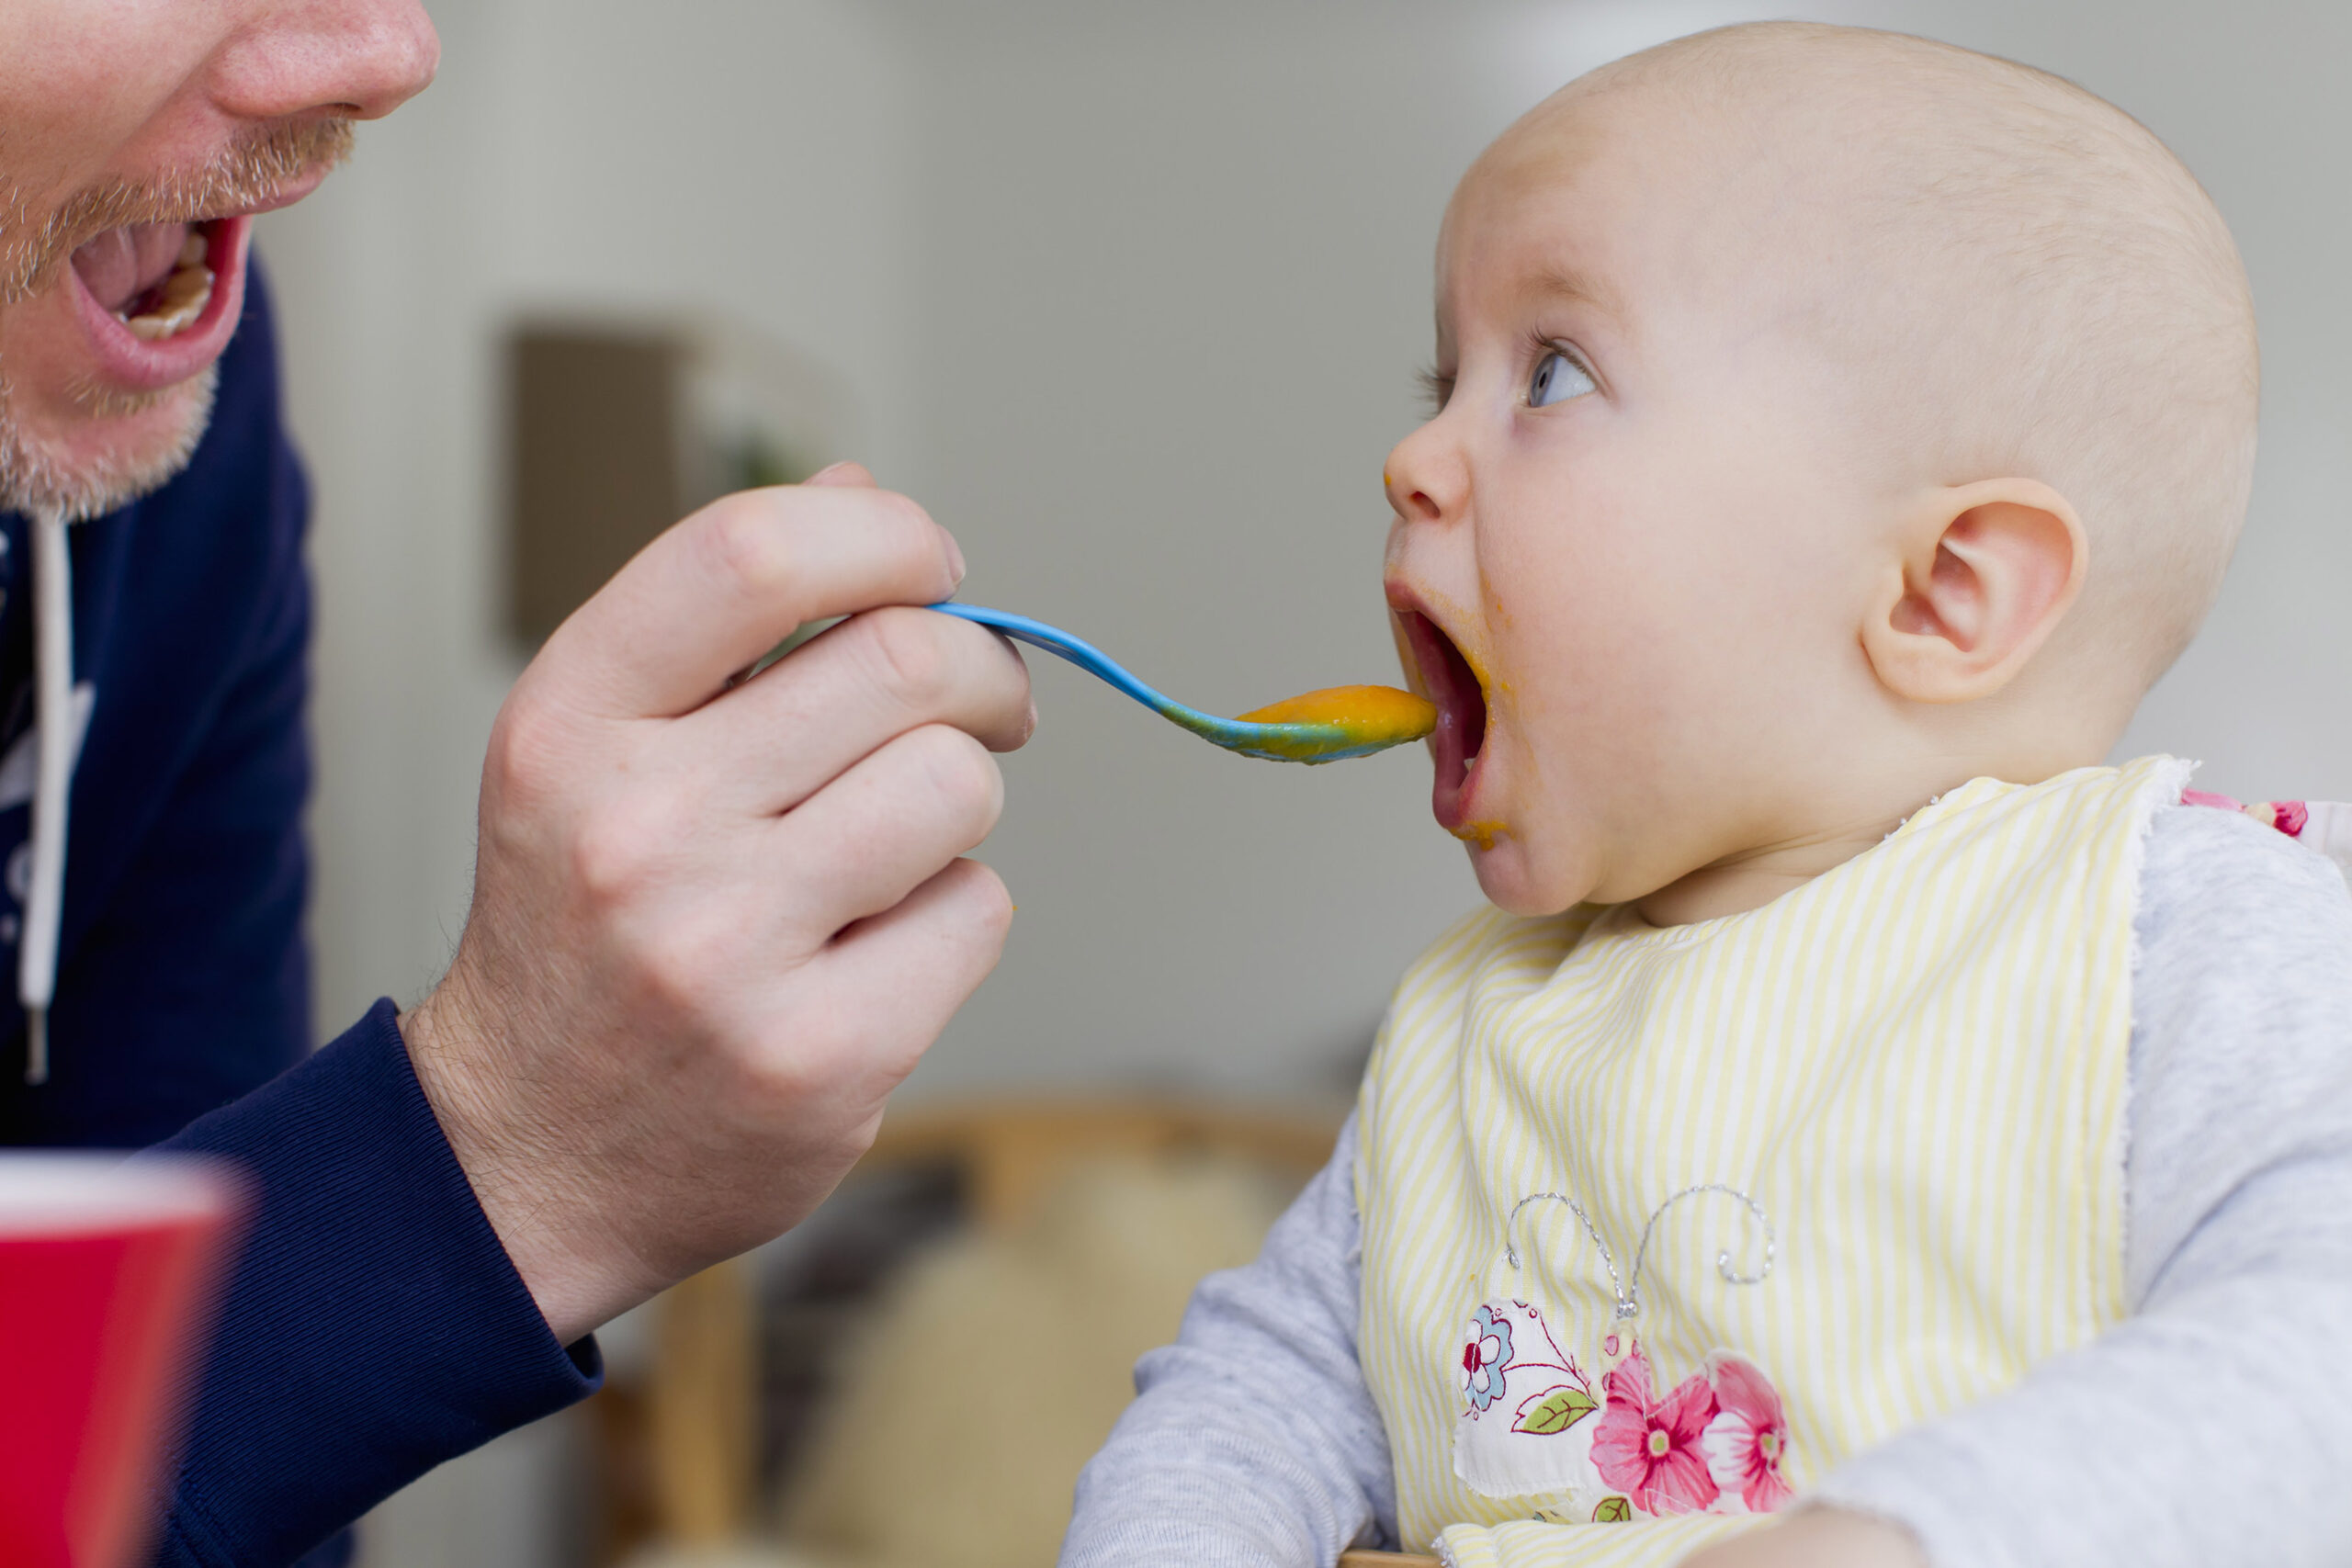 a close up photo of a father feeding his baby with a spoon. The baby has their mouth wide open ready to eat the food on the spoon.